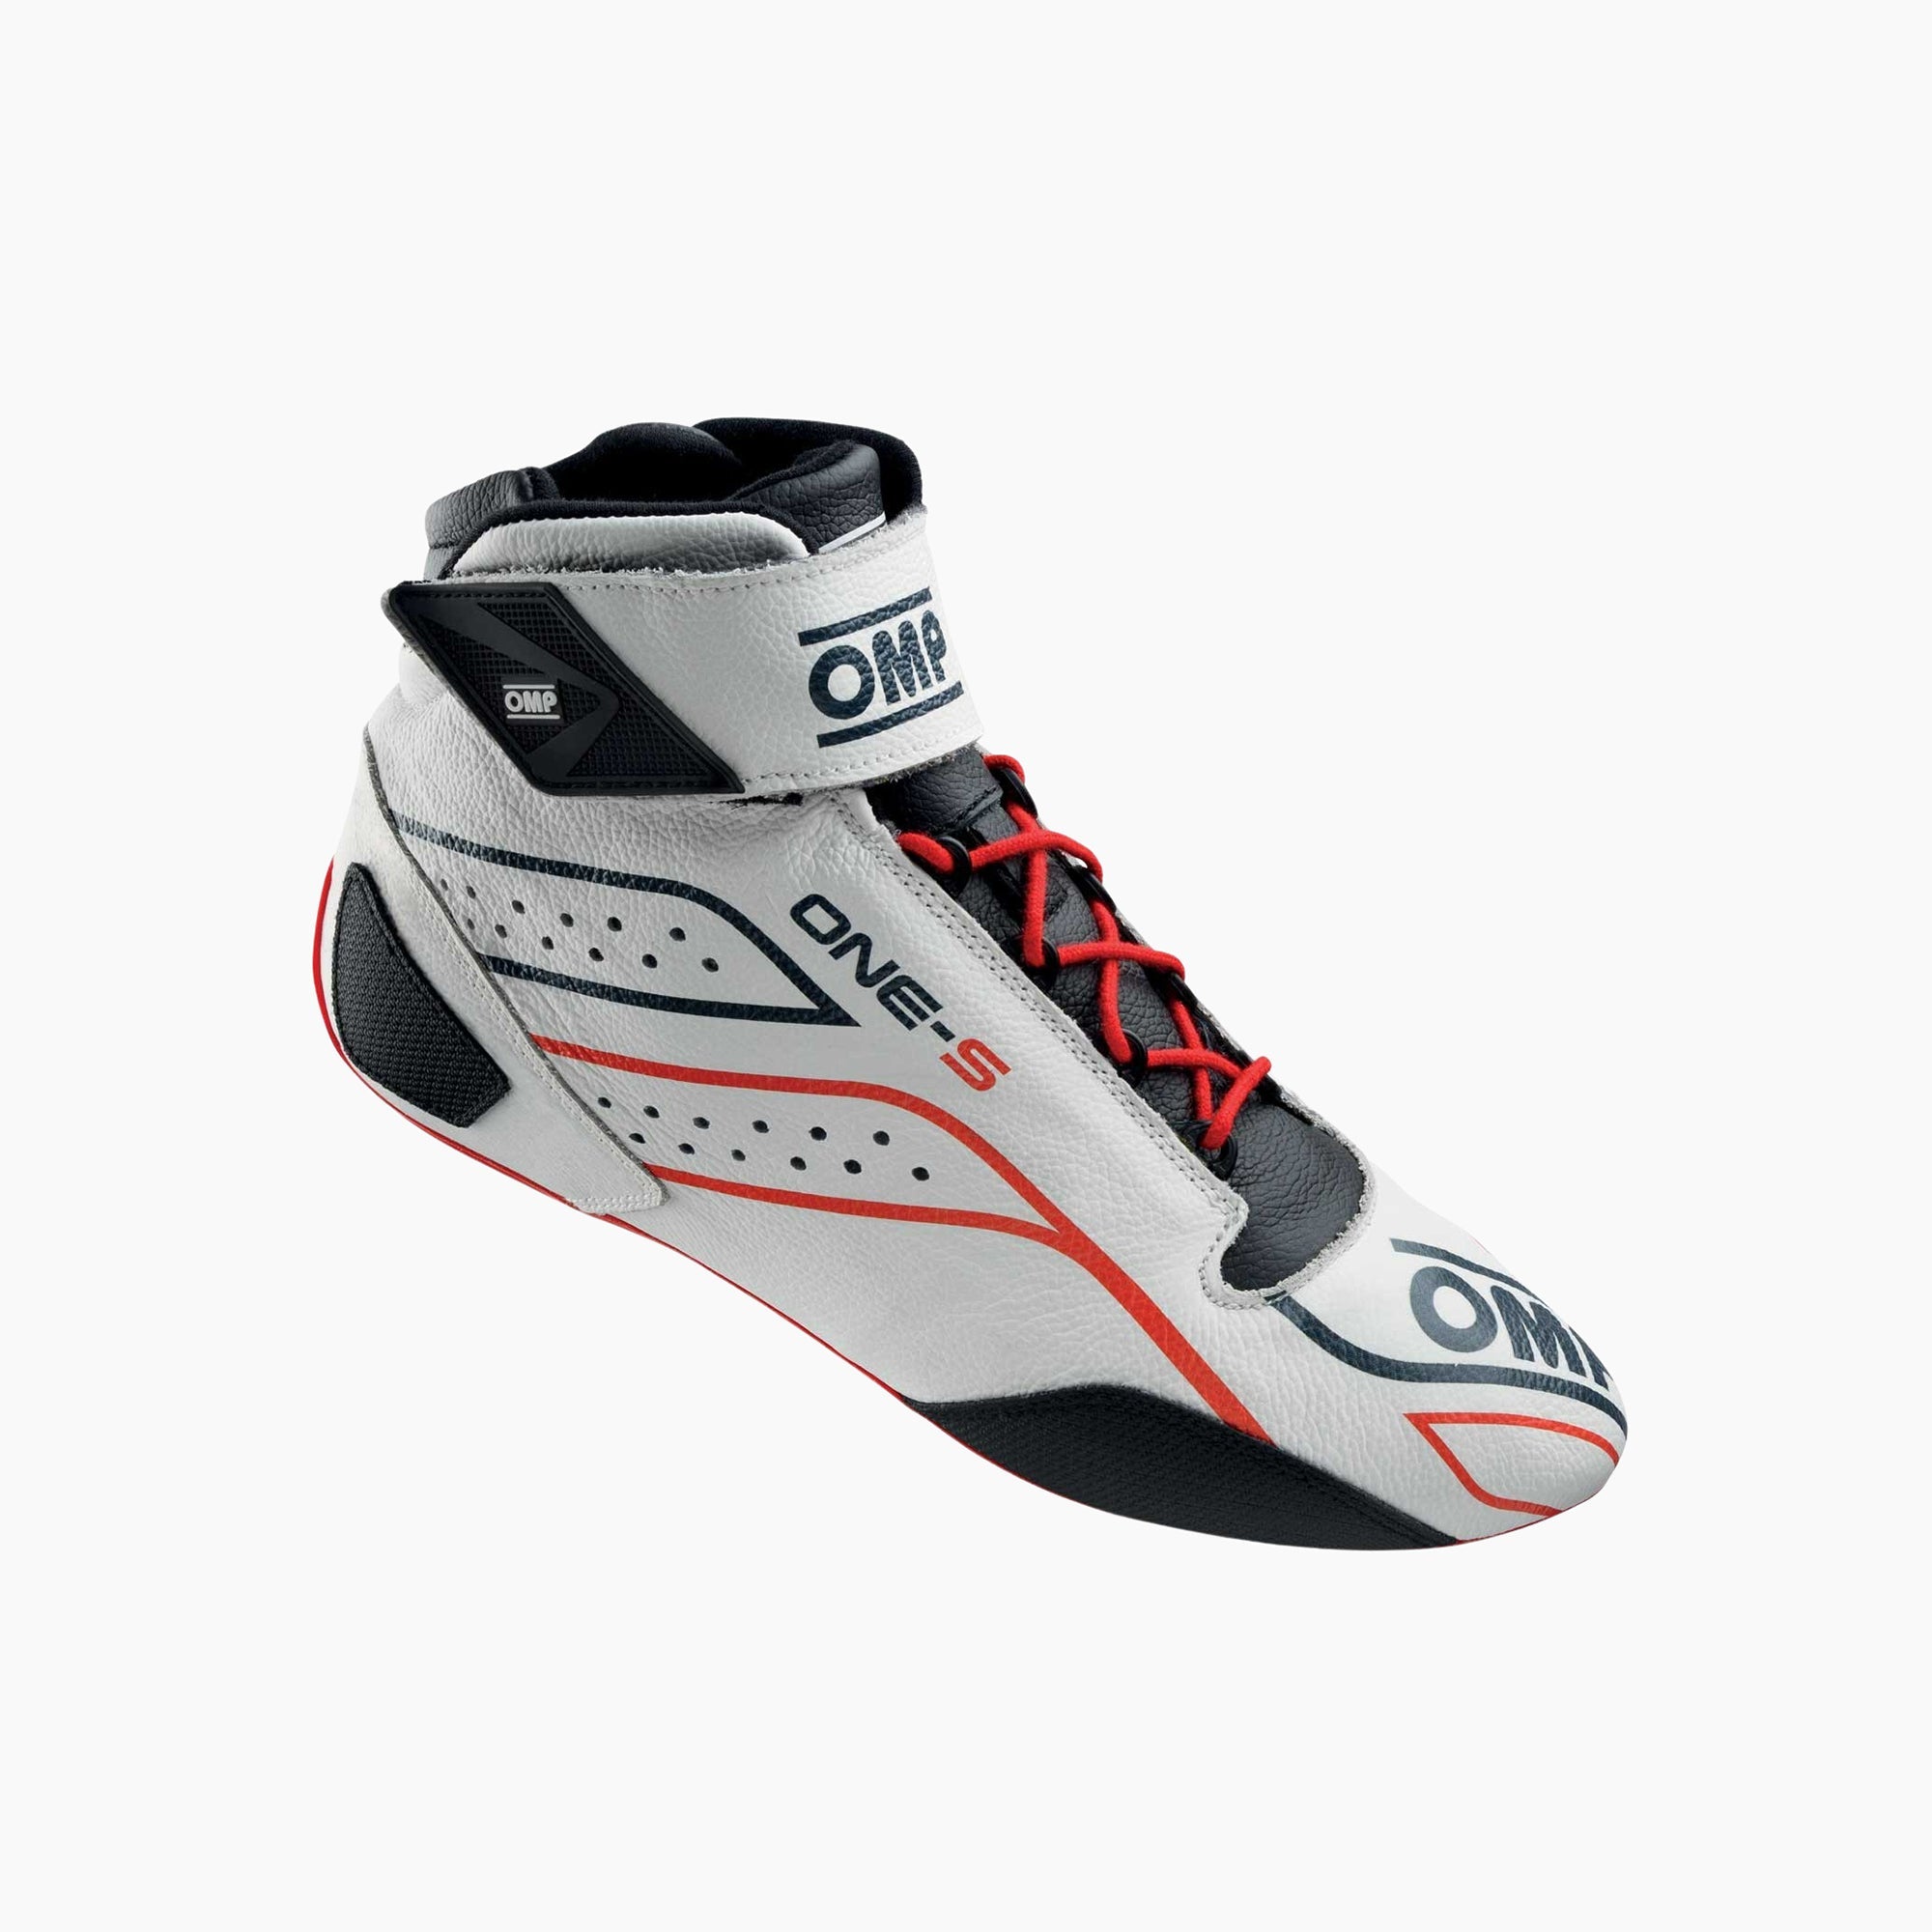 OMP | ONE-S Racing Shoes-Racing Shoes-OMP-gpx-store